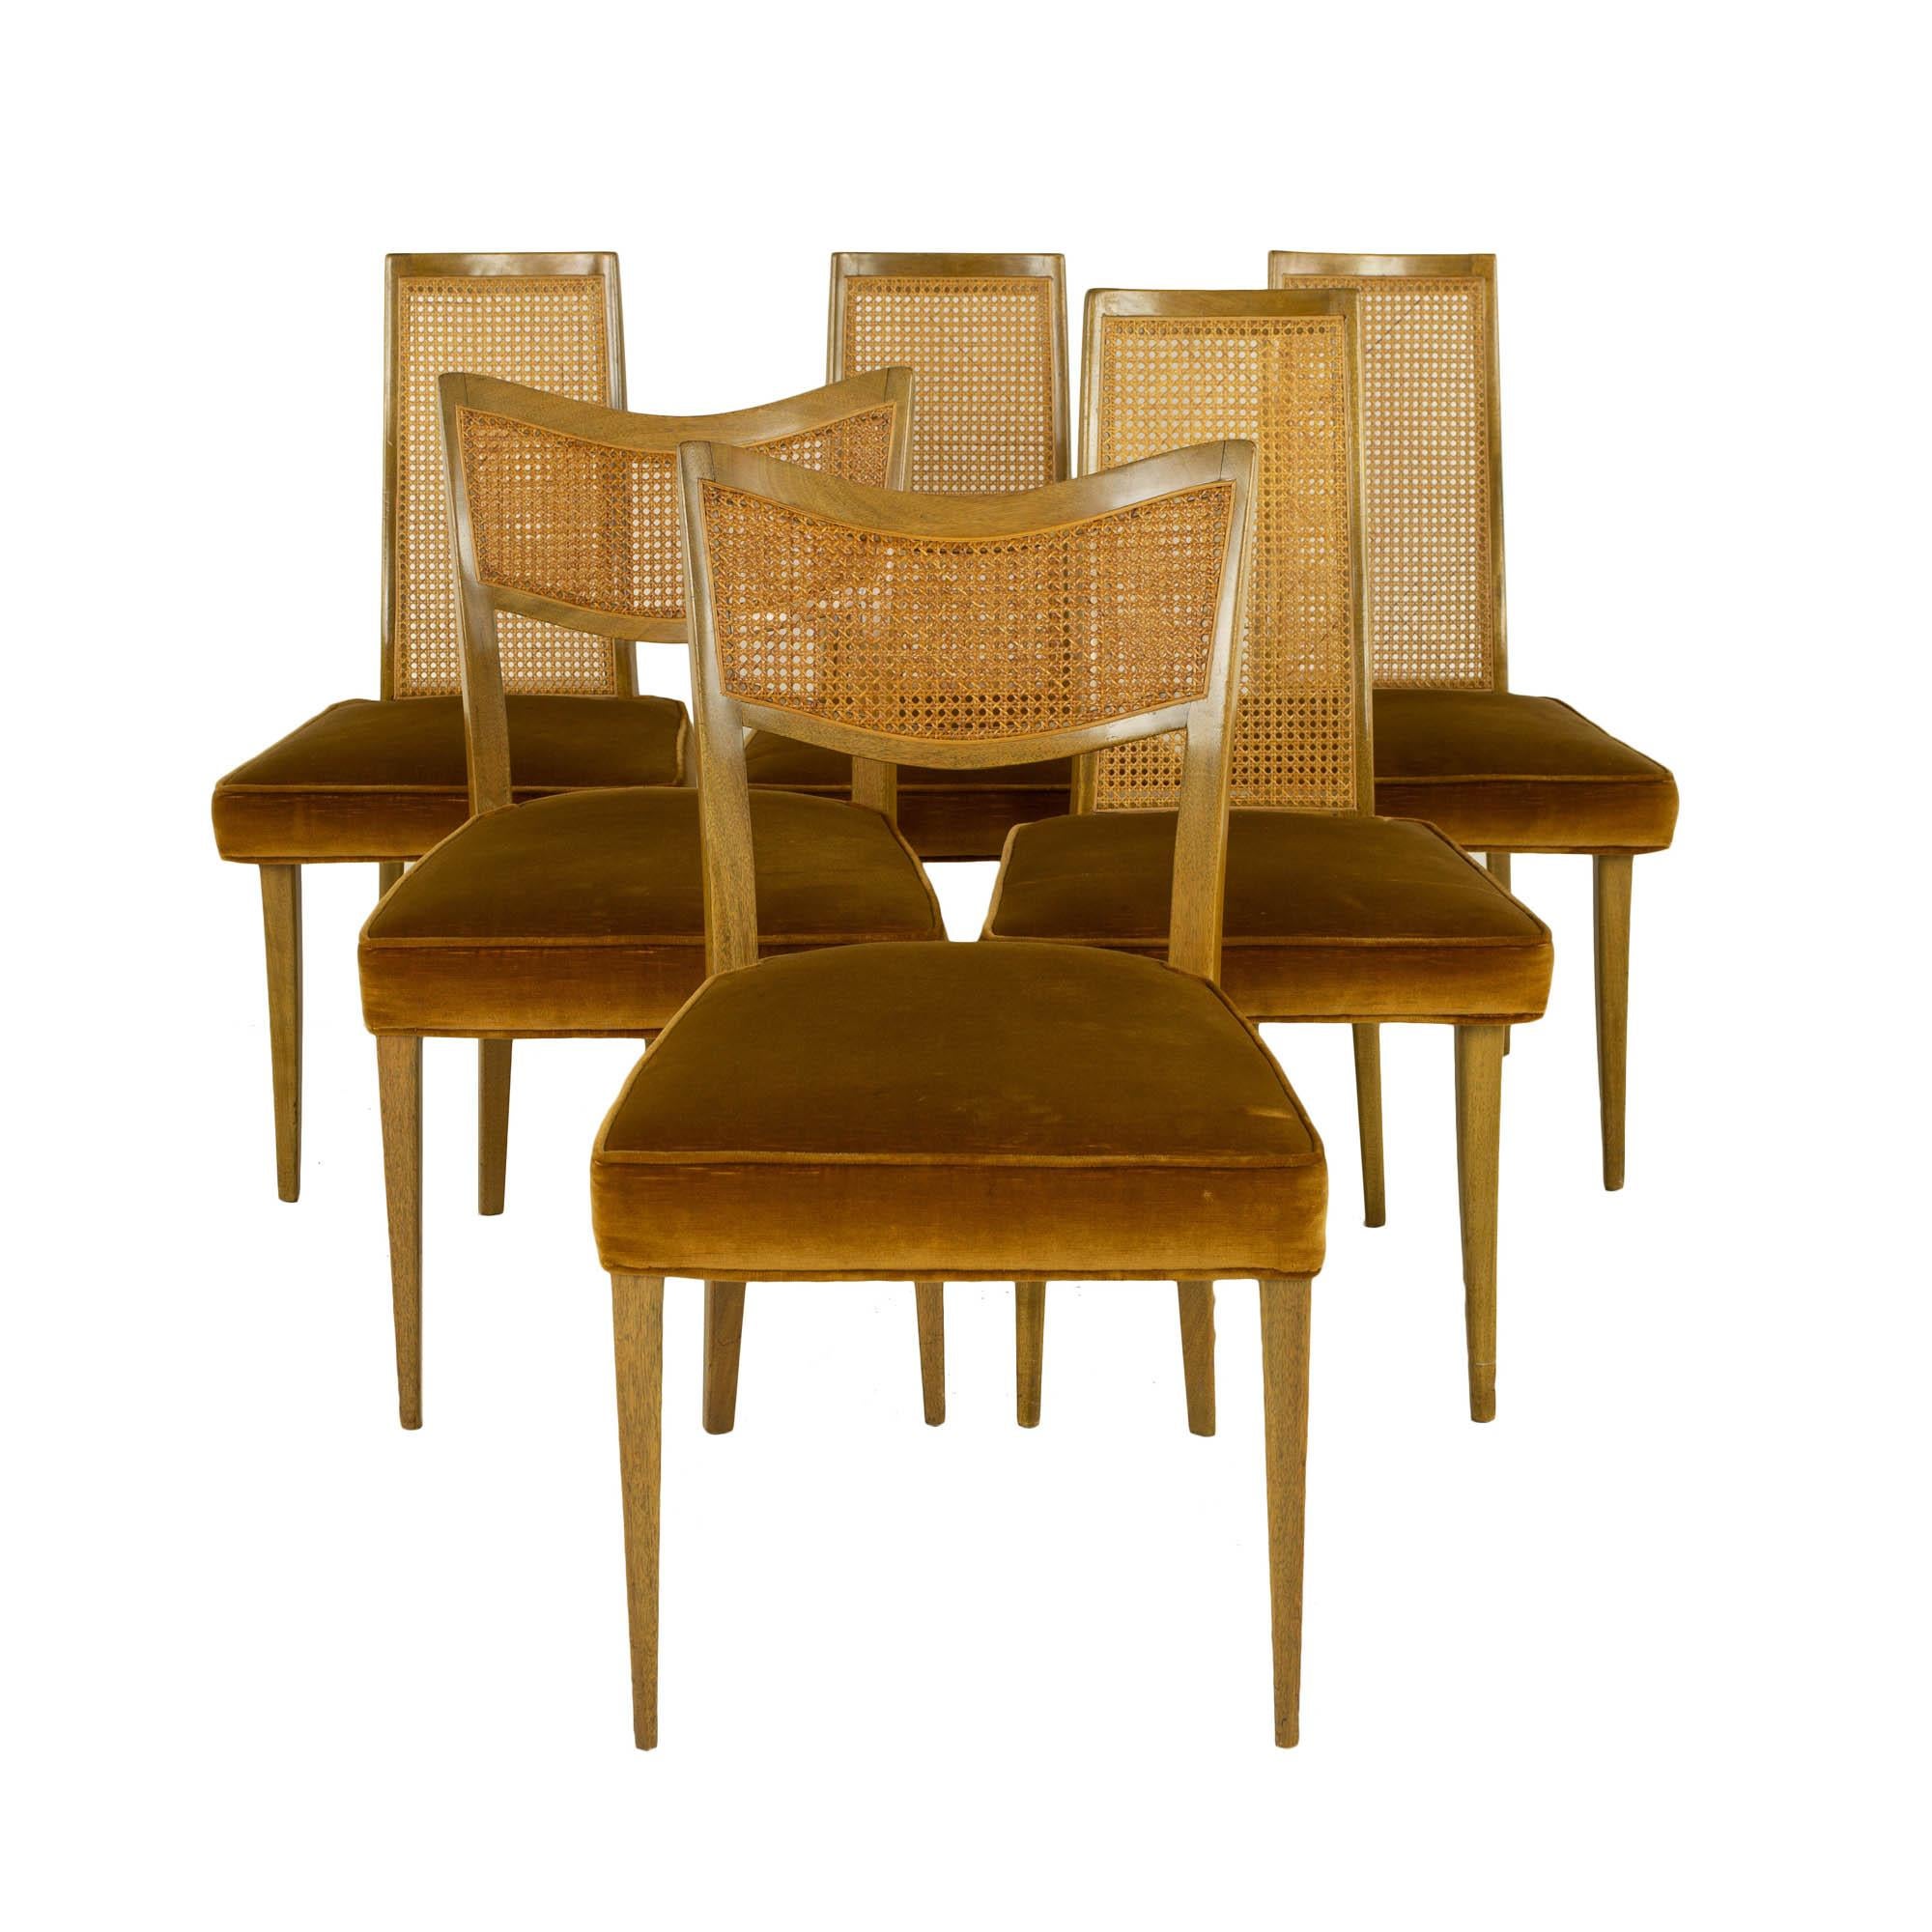 Harvey Probber mid century bleached mahogany and cane dining chairs - set of 6

These chairs measure: 20 wide x 21.5 deep x 35 inches high with a seat height of 18.75 inches

?All pieces of furniture can be had in what we call restored vintage